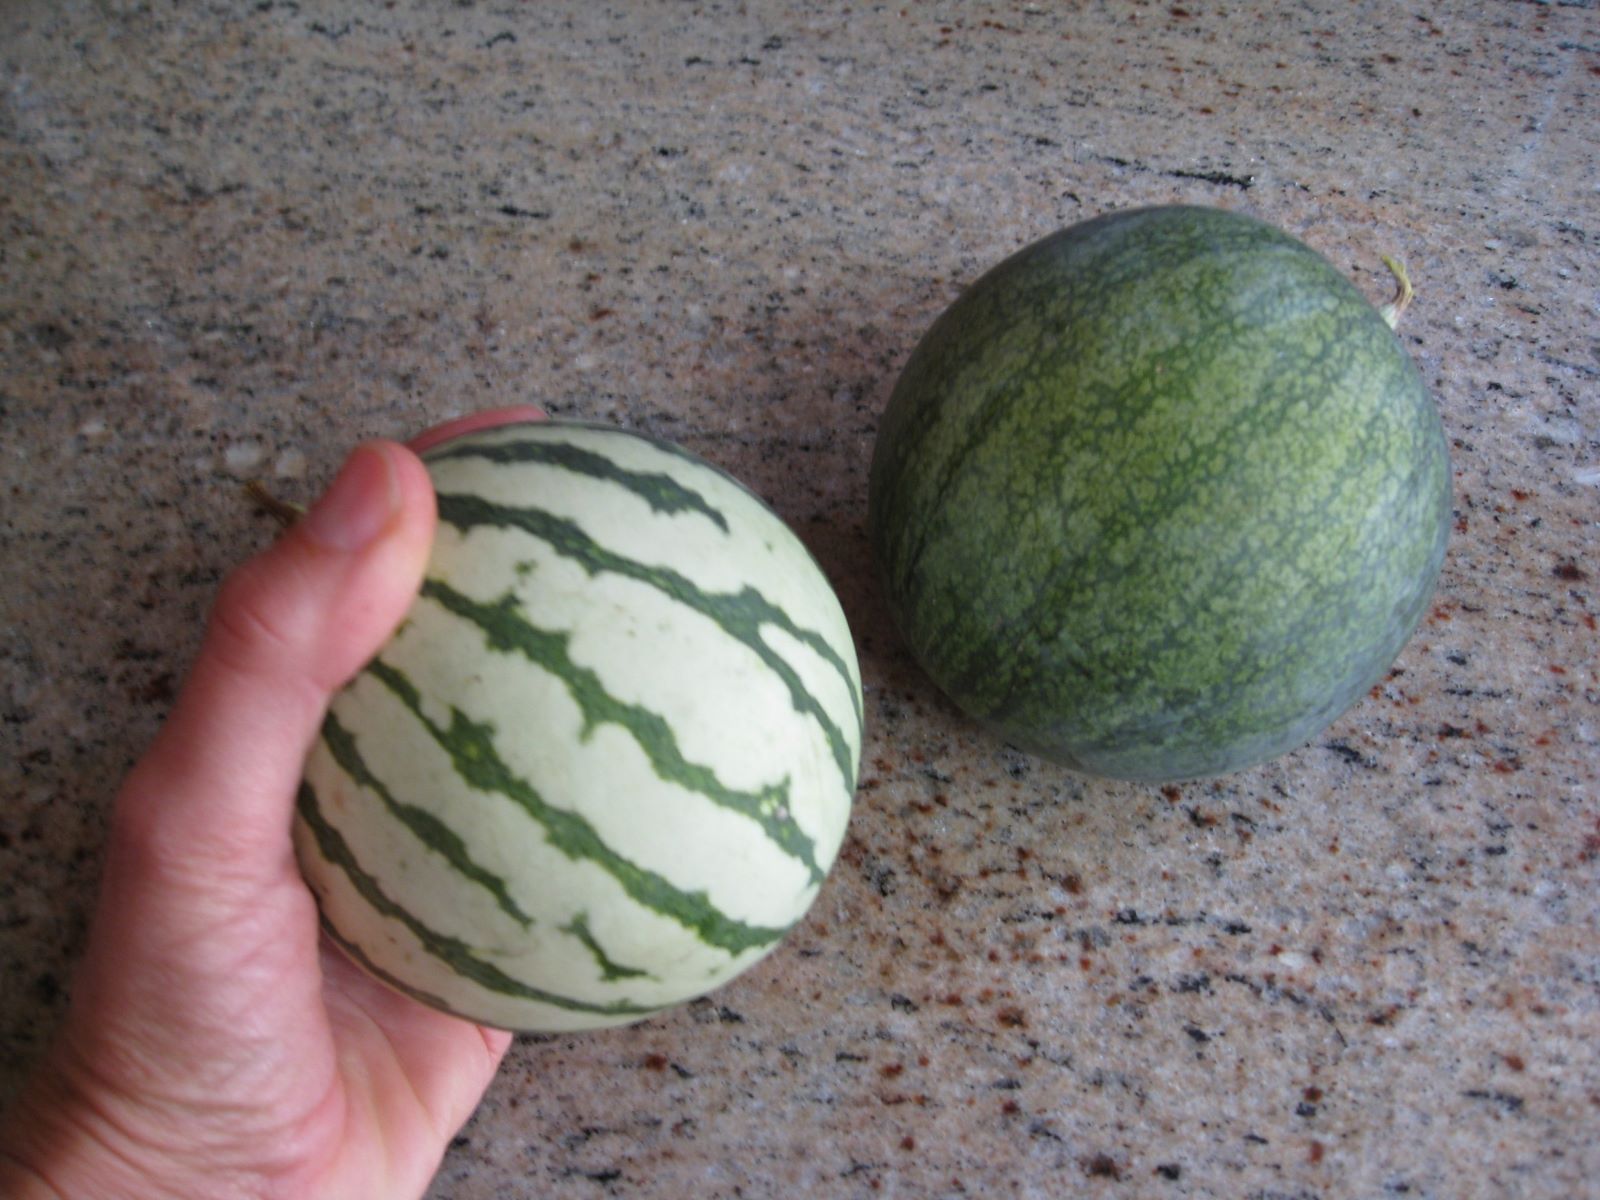 The Surprising Calorie Count Of A Small Watermelon Revealed!